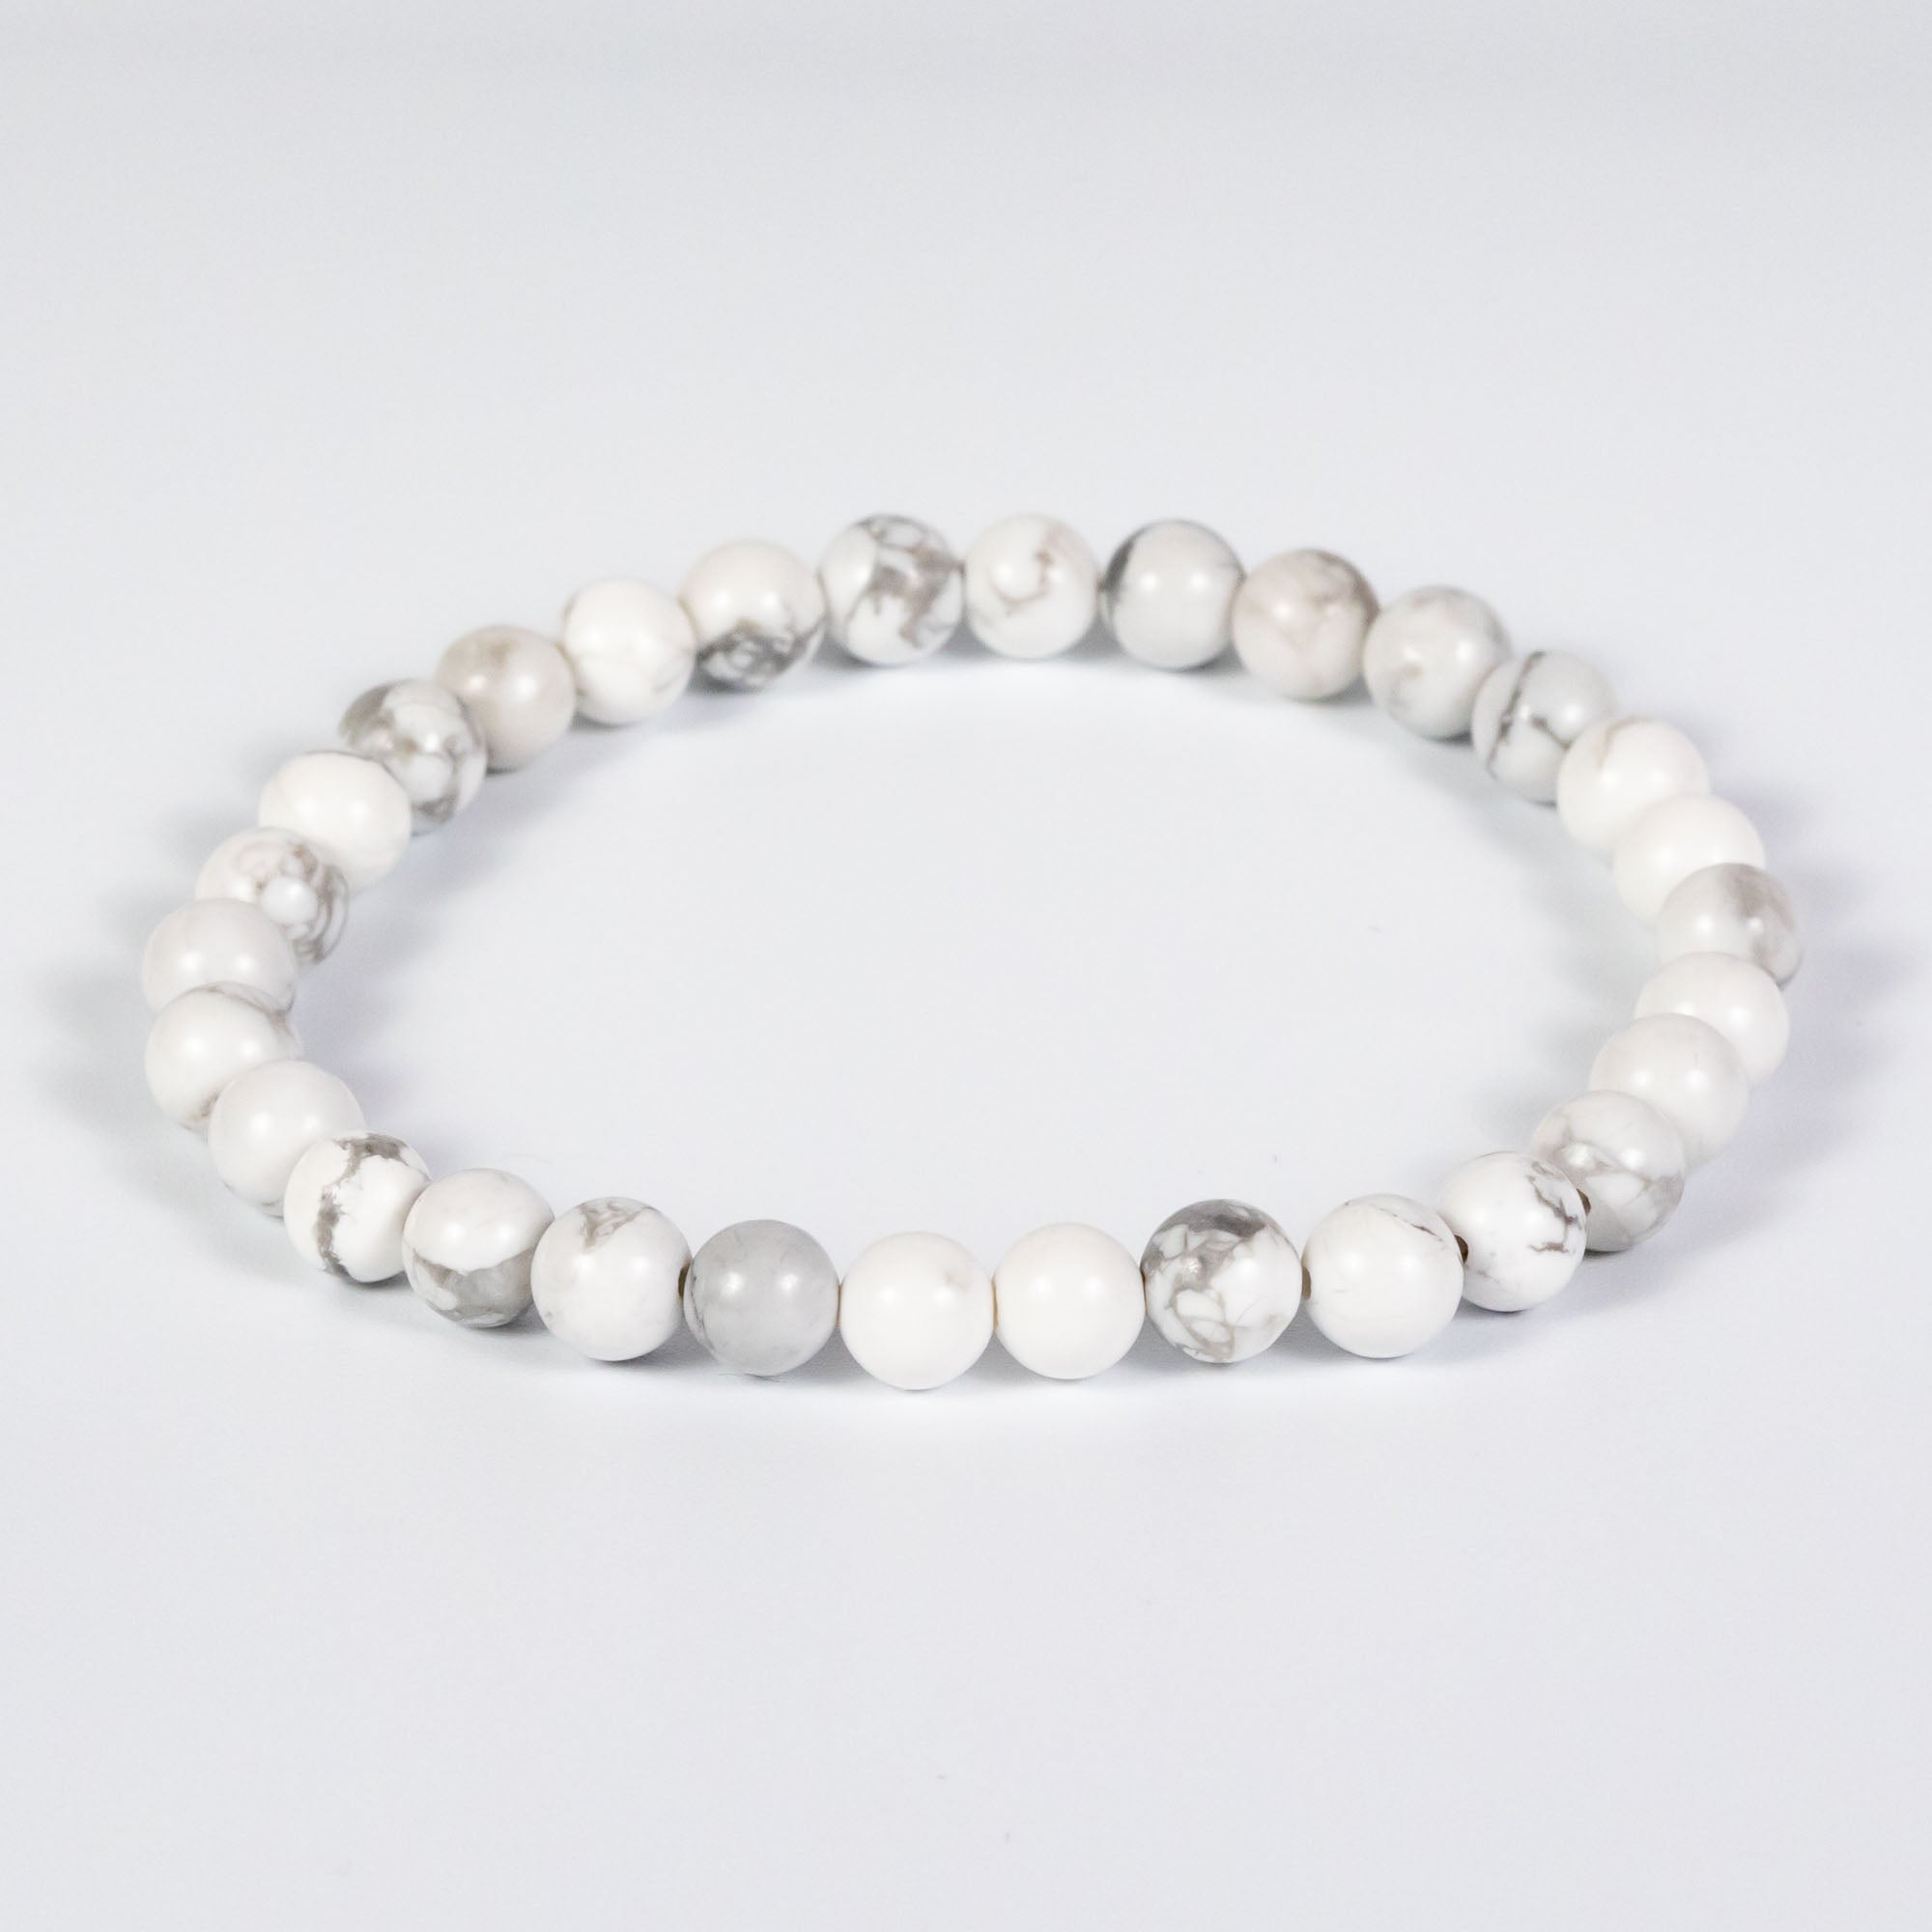 White & Clear Jewellery